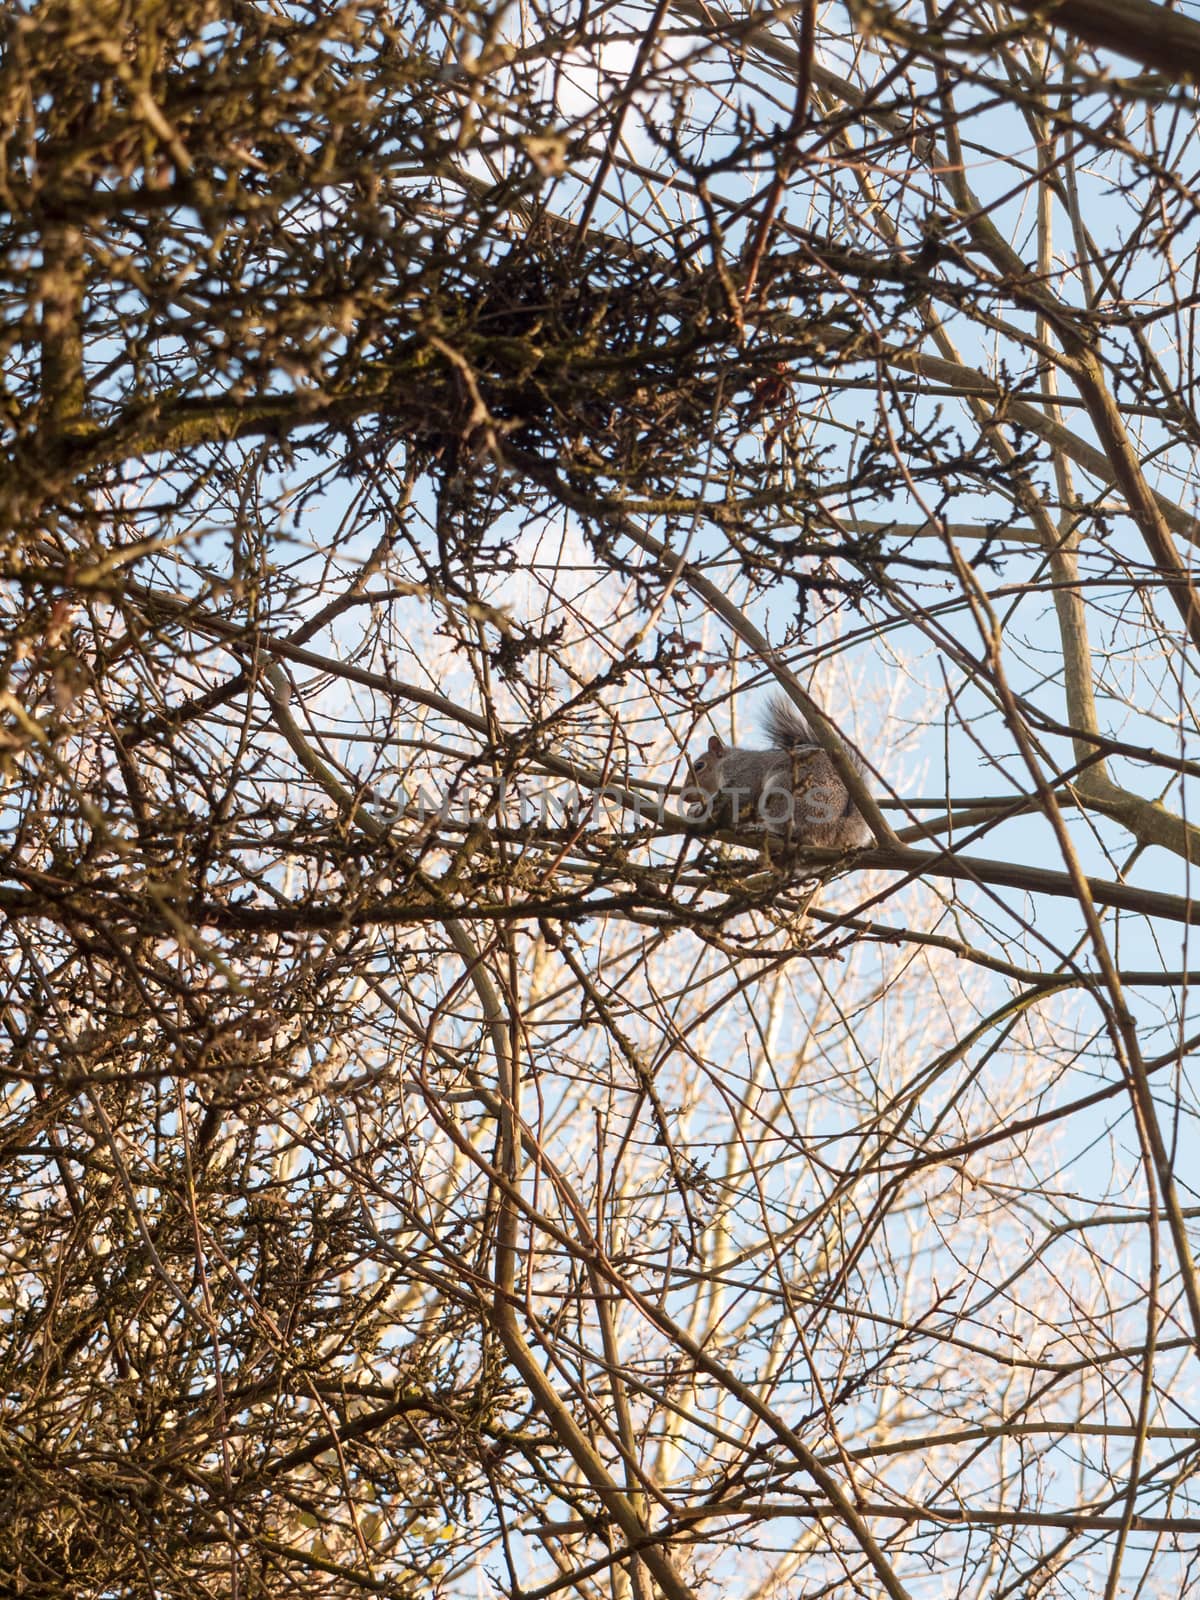 grey squirrel up in tree canopy branches eating by callumrc